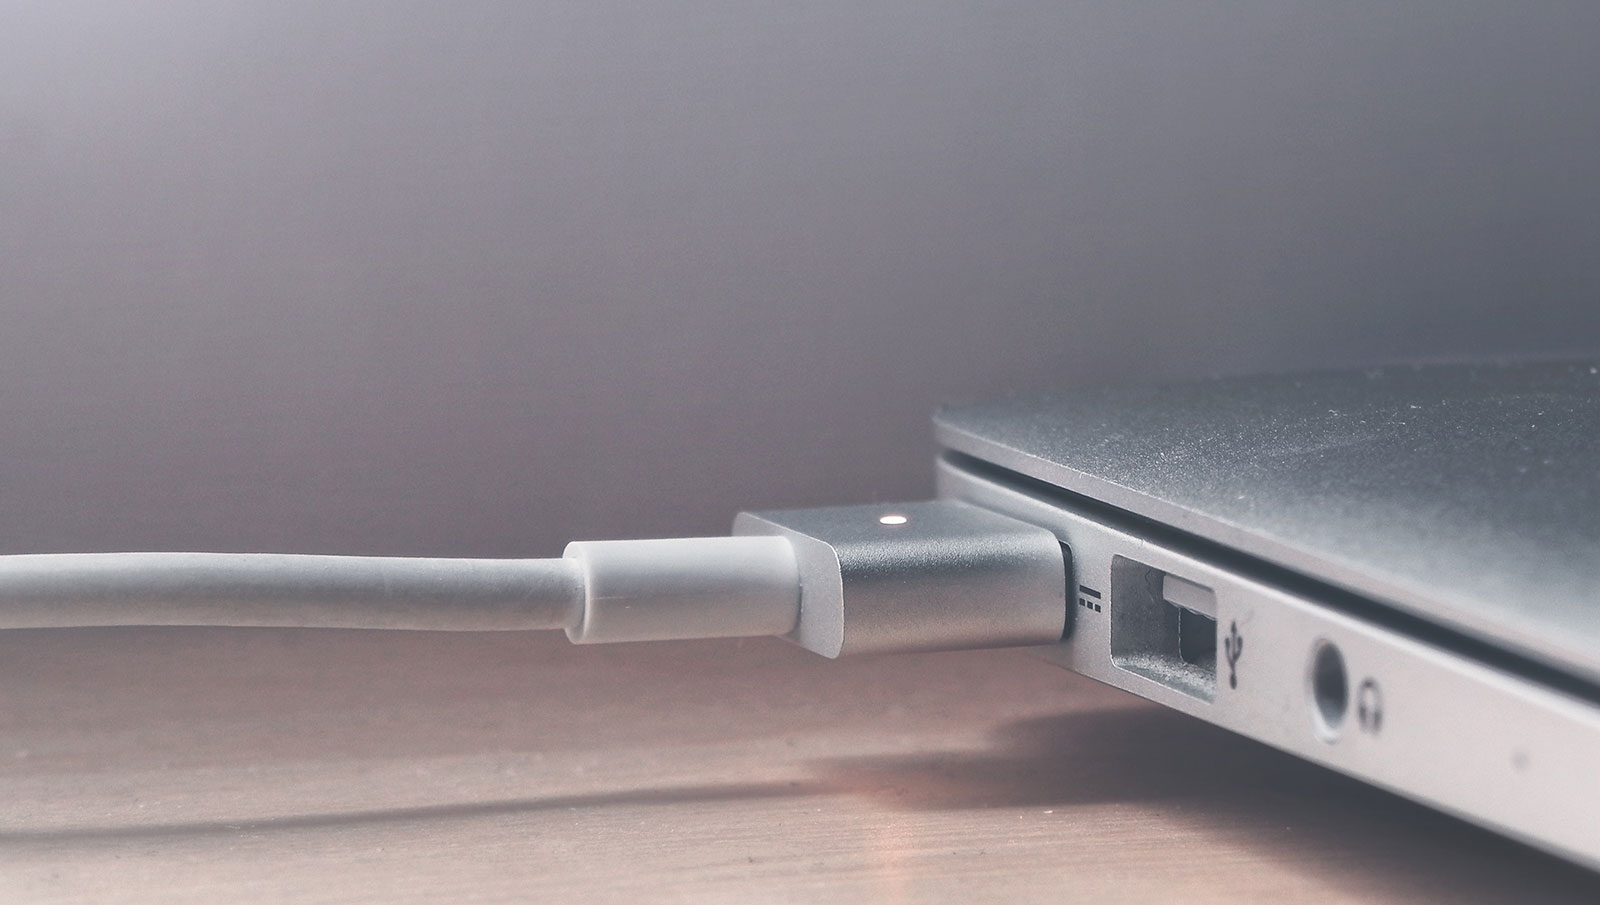 If the MacBook Pro rumours about USB Type C are true, say goodbye to Apple's MagSafe power connector.